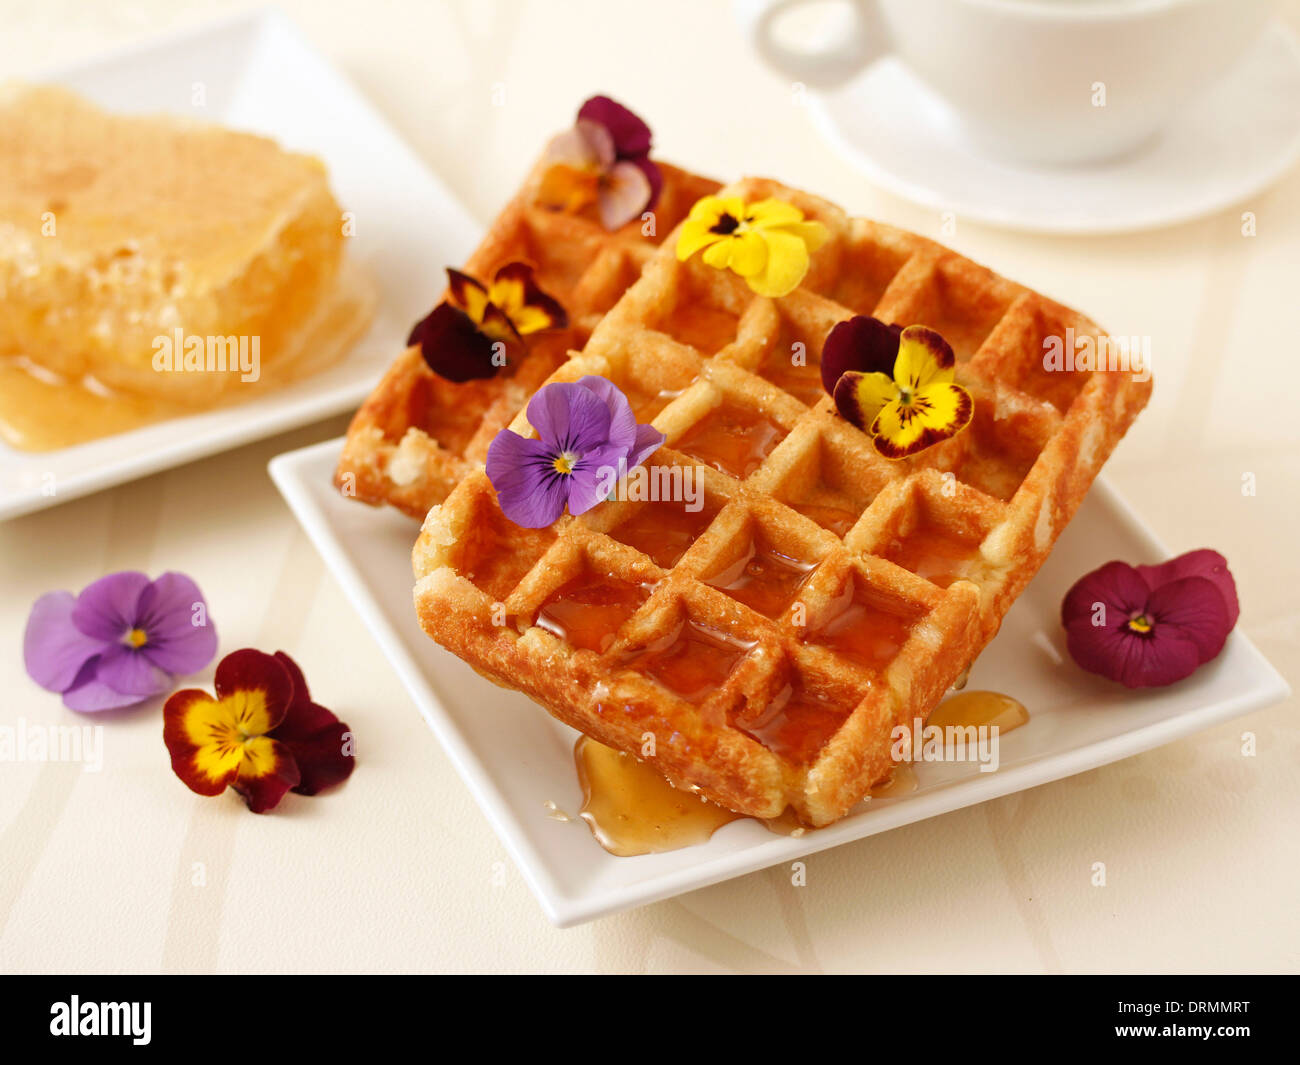 Waffles with honey and flowers. Recipe available. Stock Photo